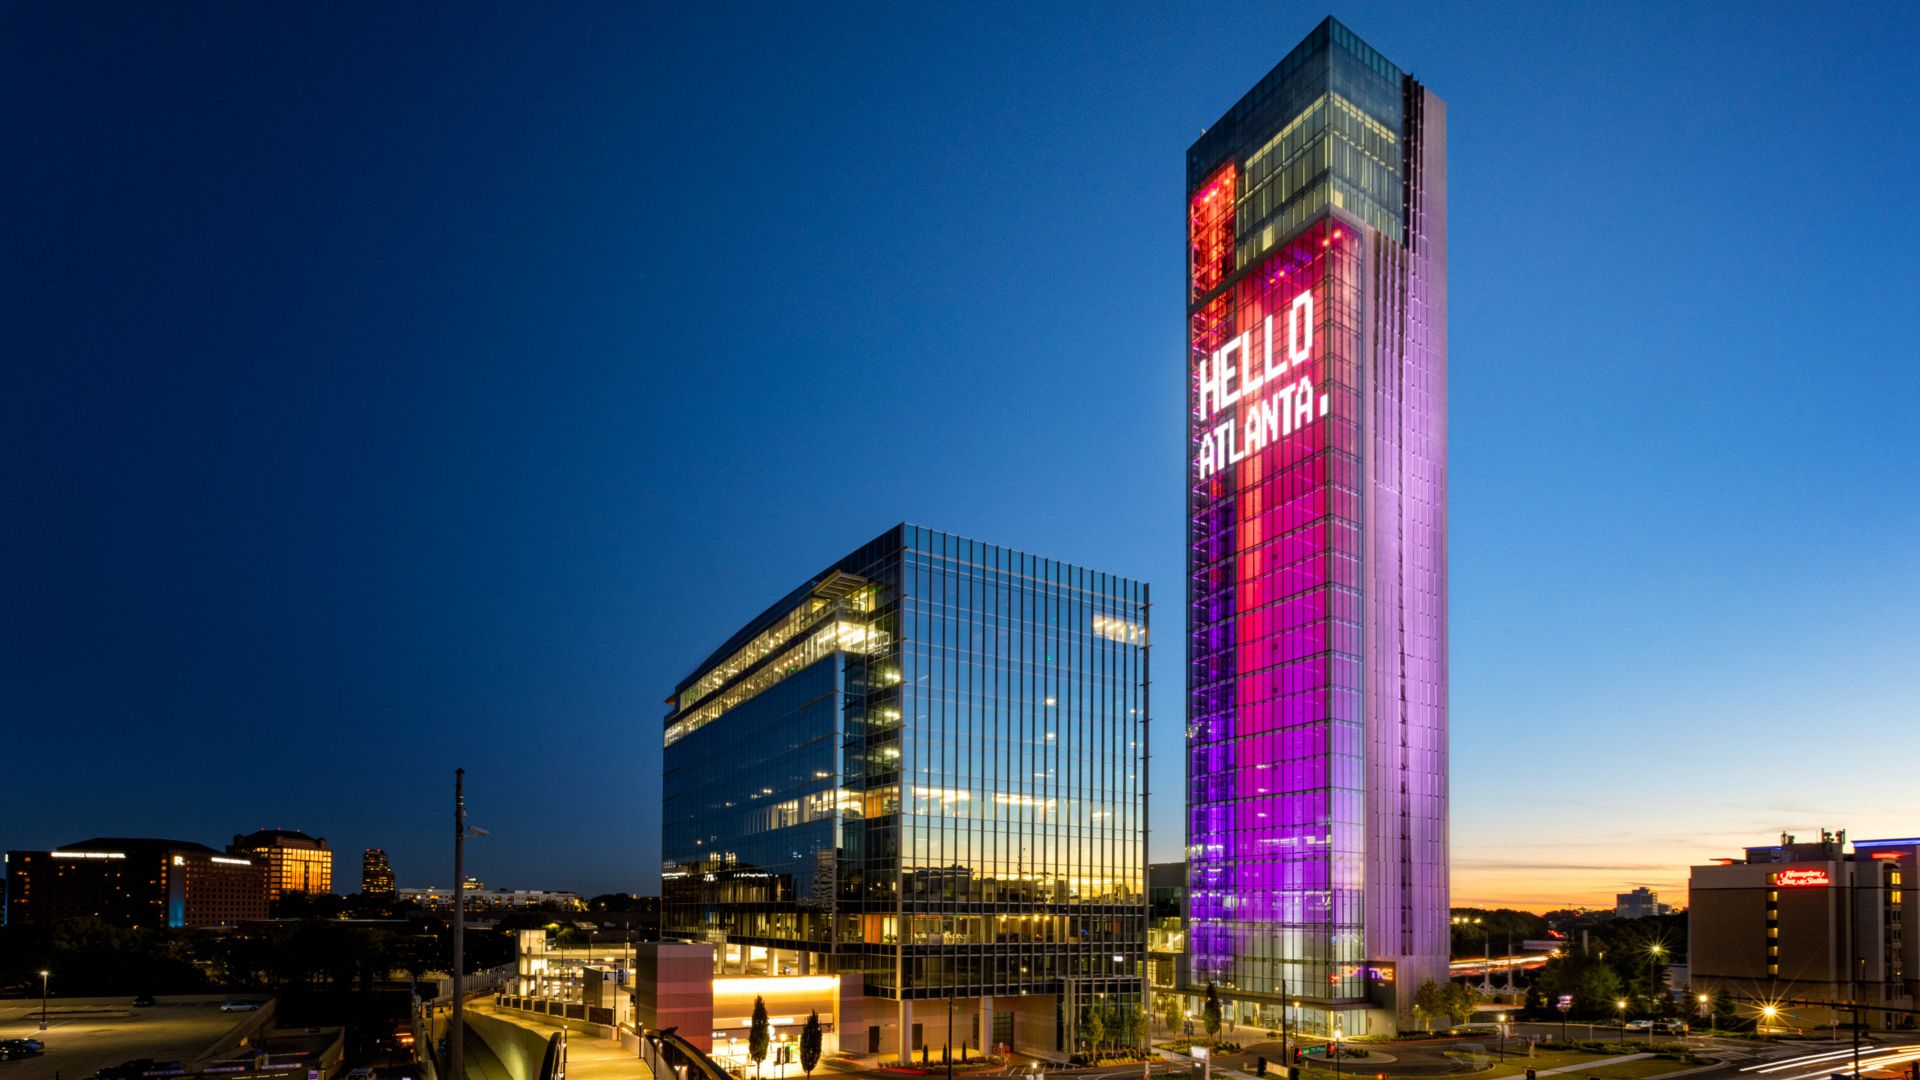 A tall tower illuminated in purple and red beams of light with a large digital sign reading "Hello Atlanta"